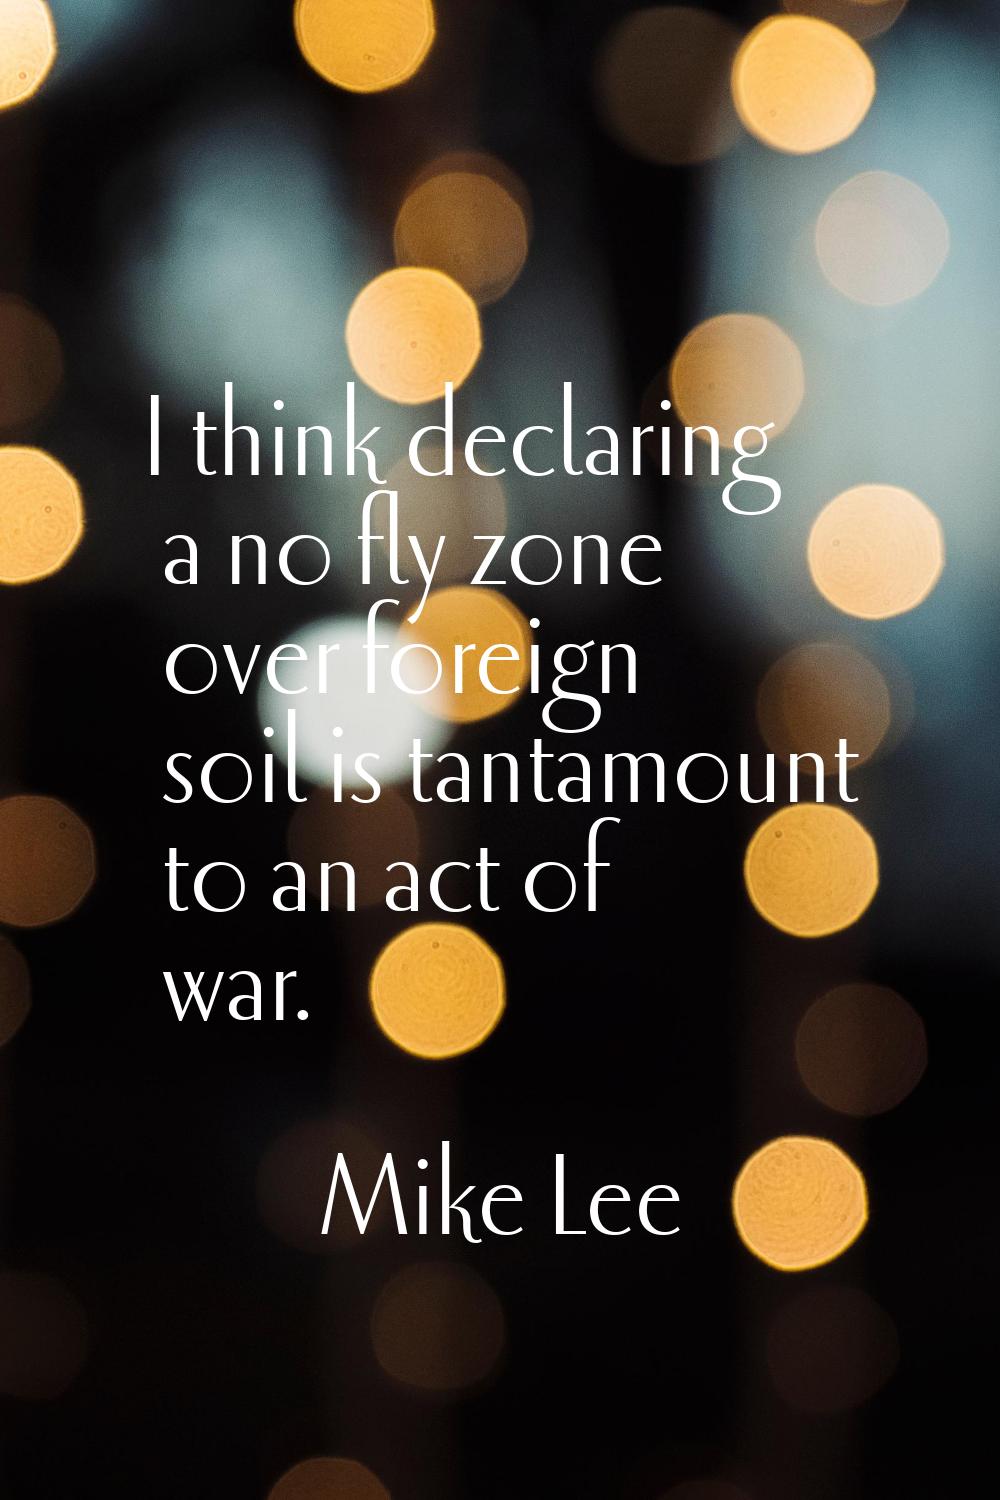 I think declaring a no fly zone over foreign soil is tantamount to an act of war.